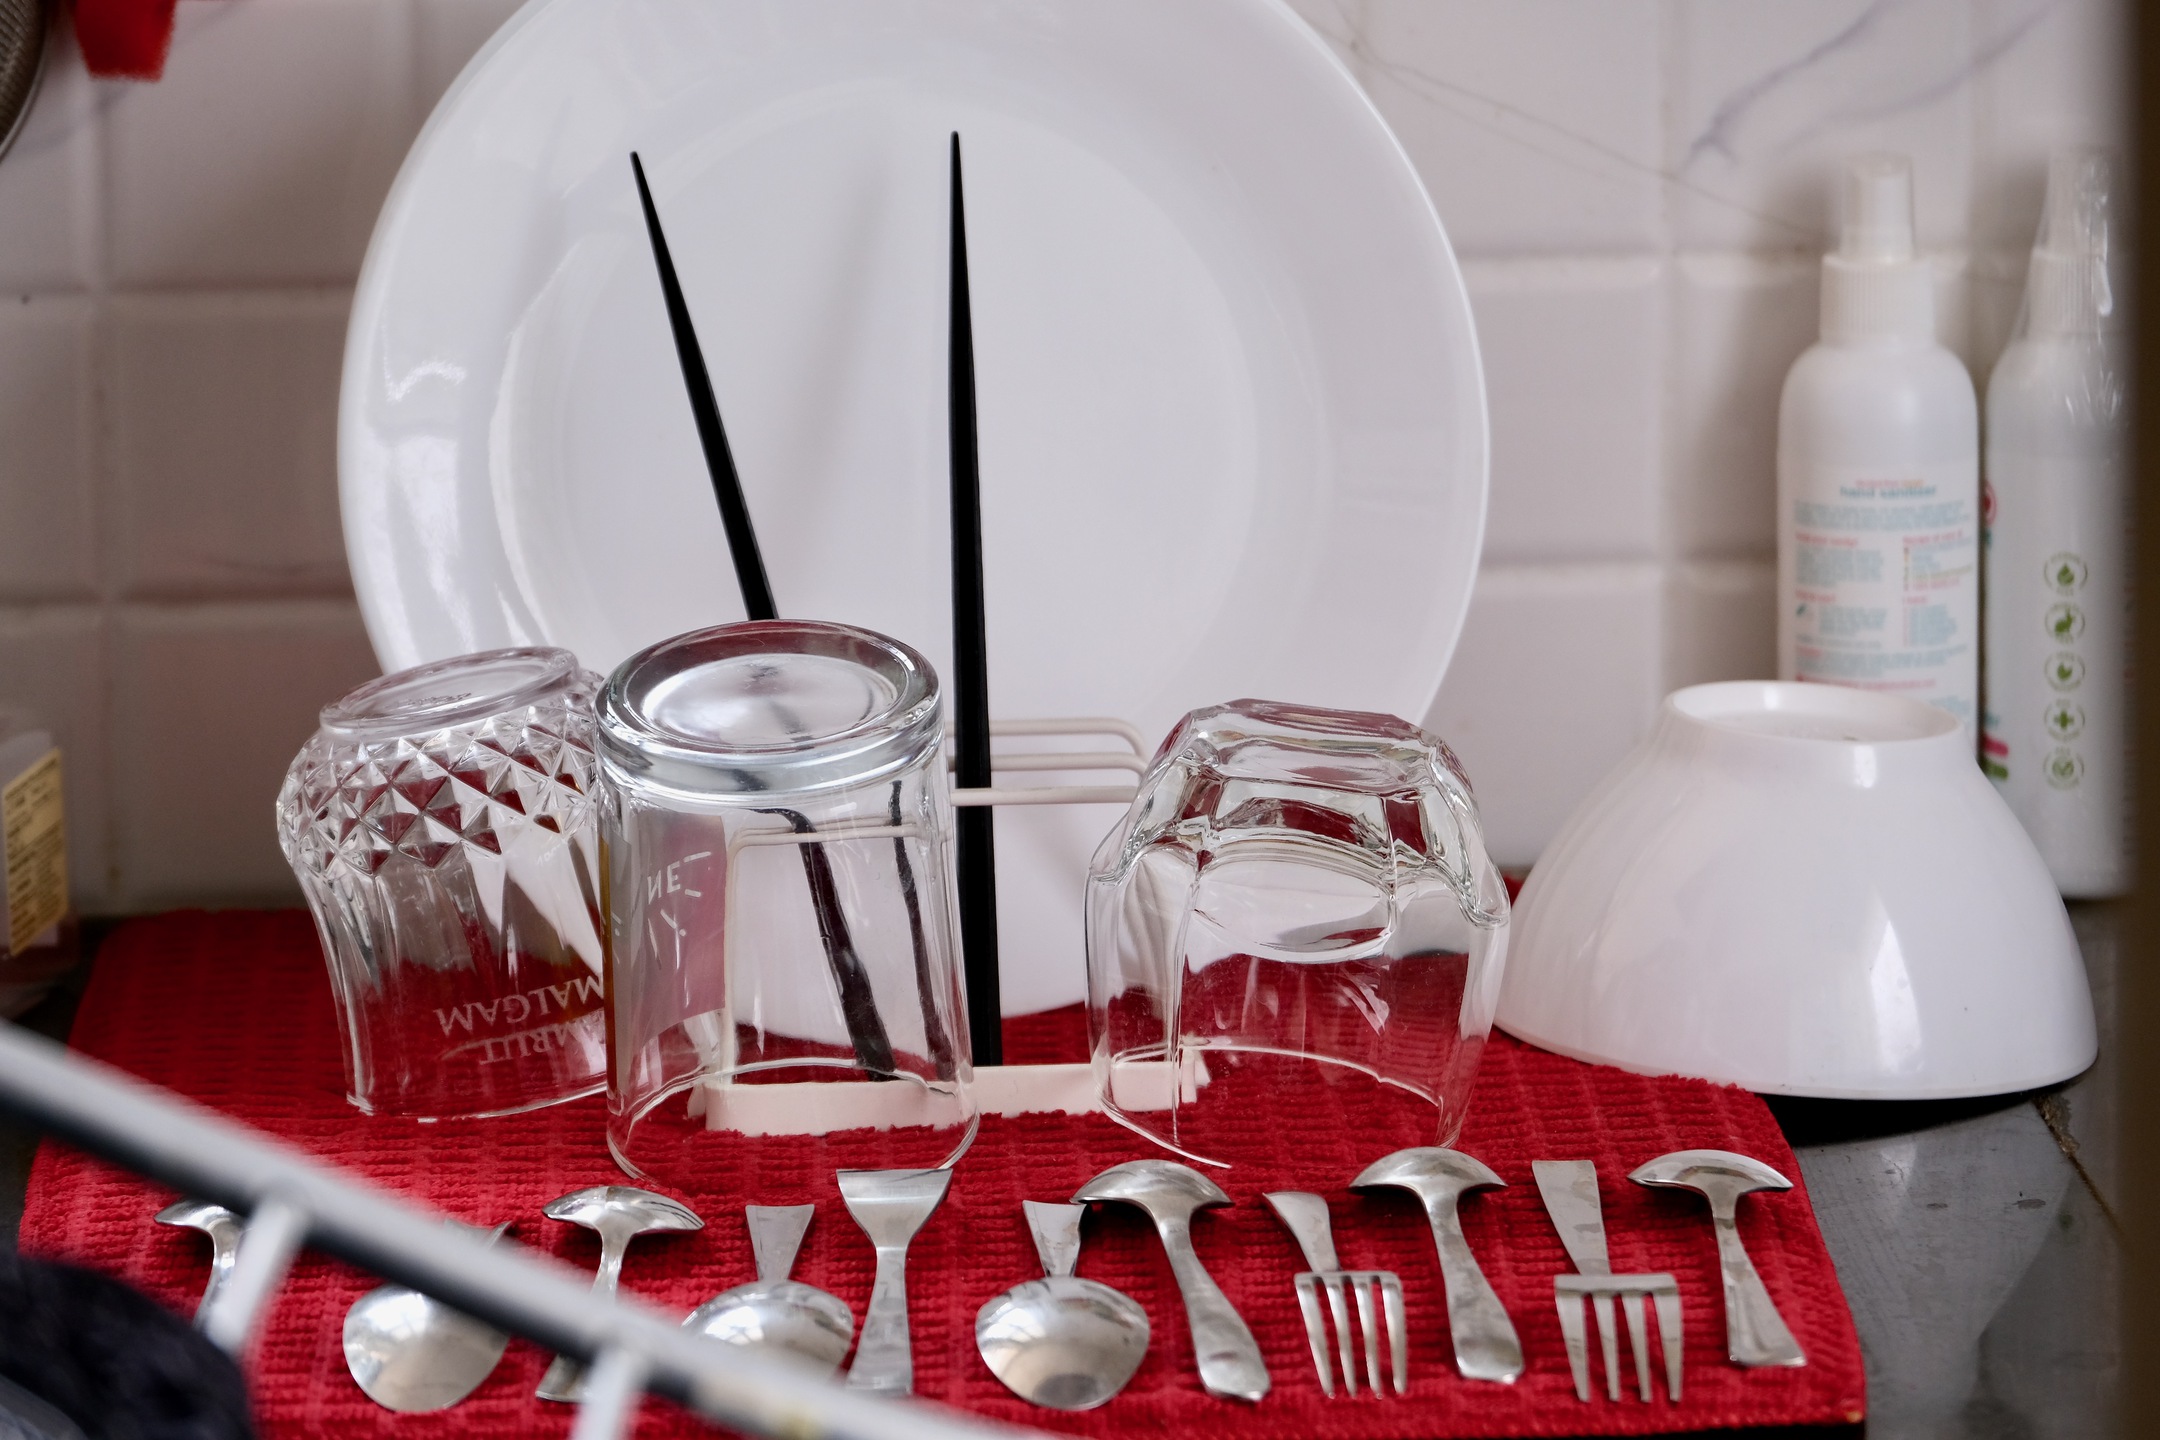 A close-up shot showing washed plates, chopsticks, spoons, forks, and glasses on a red drying mat.